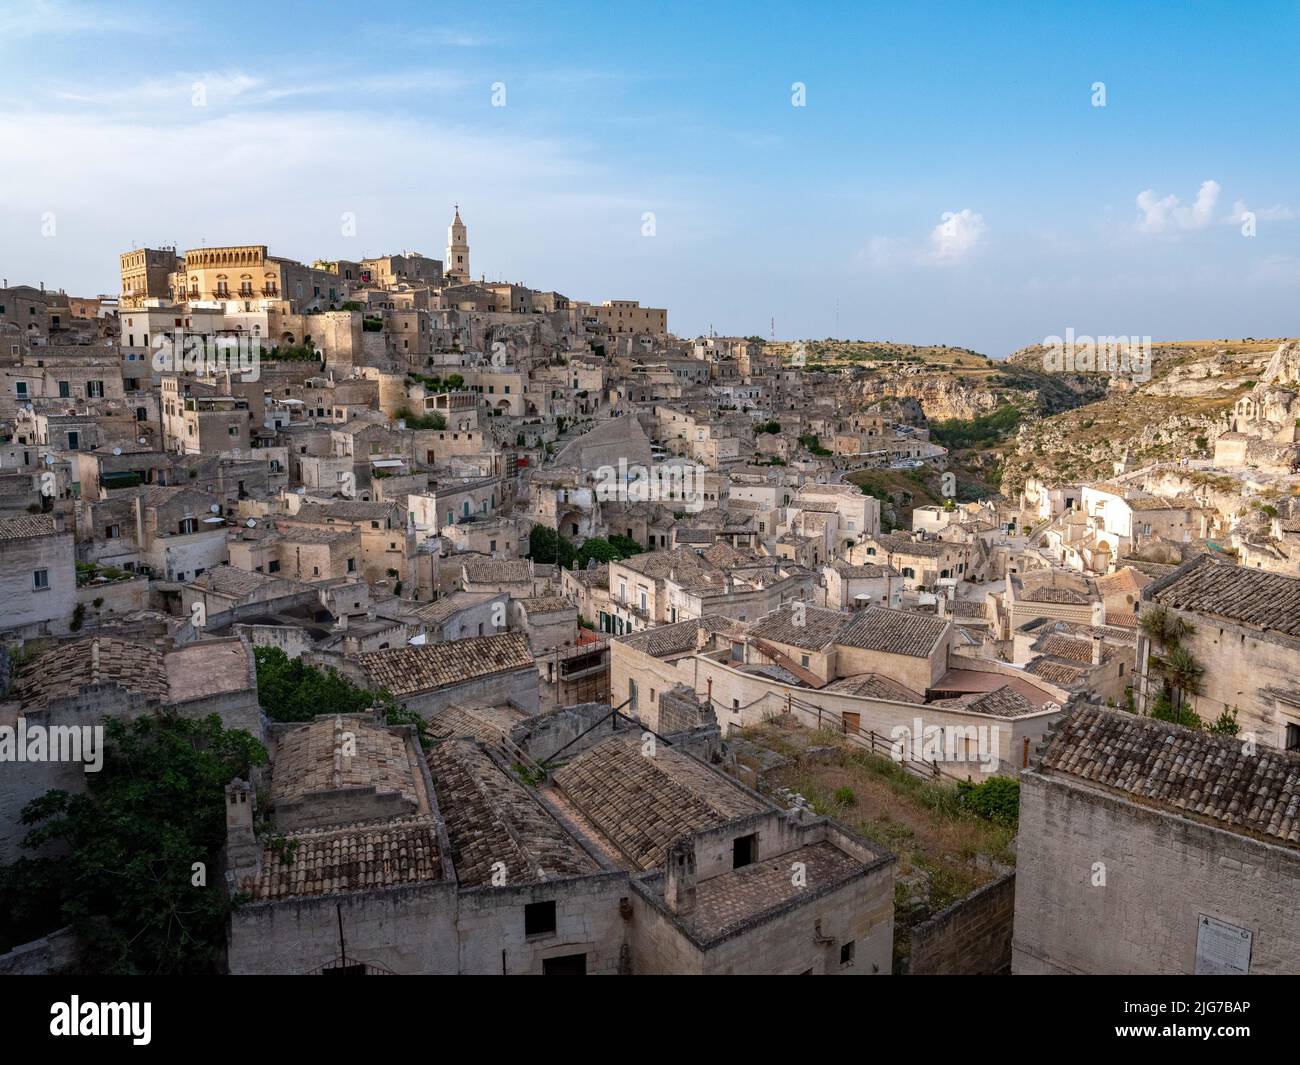 Panoramic view of the sassi or old city of Matera, Basilicata, Italy with its cathedral and cave houses built into the surrounding hills. Stock Photo